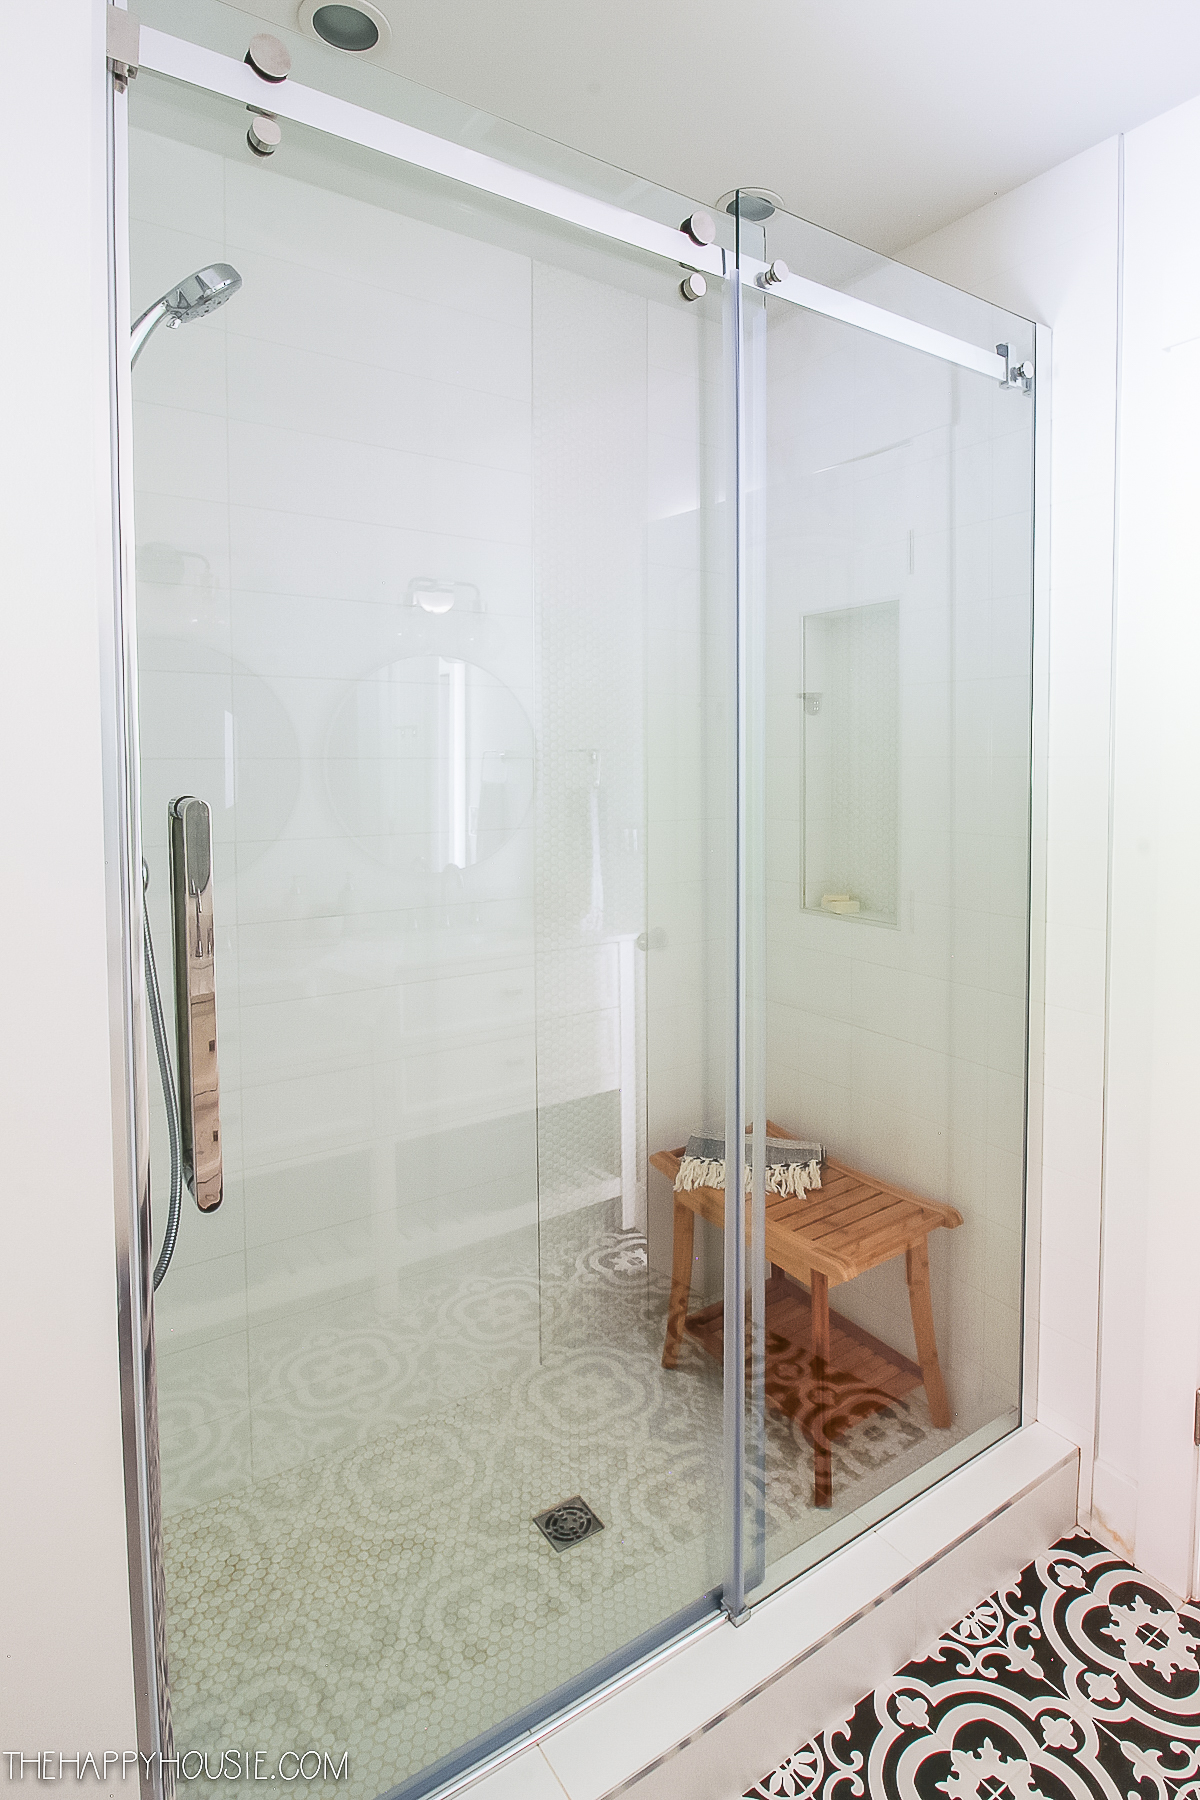 A small wooden bench is inside the shower stall.